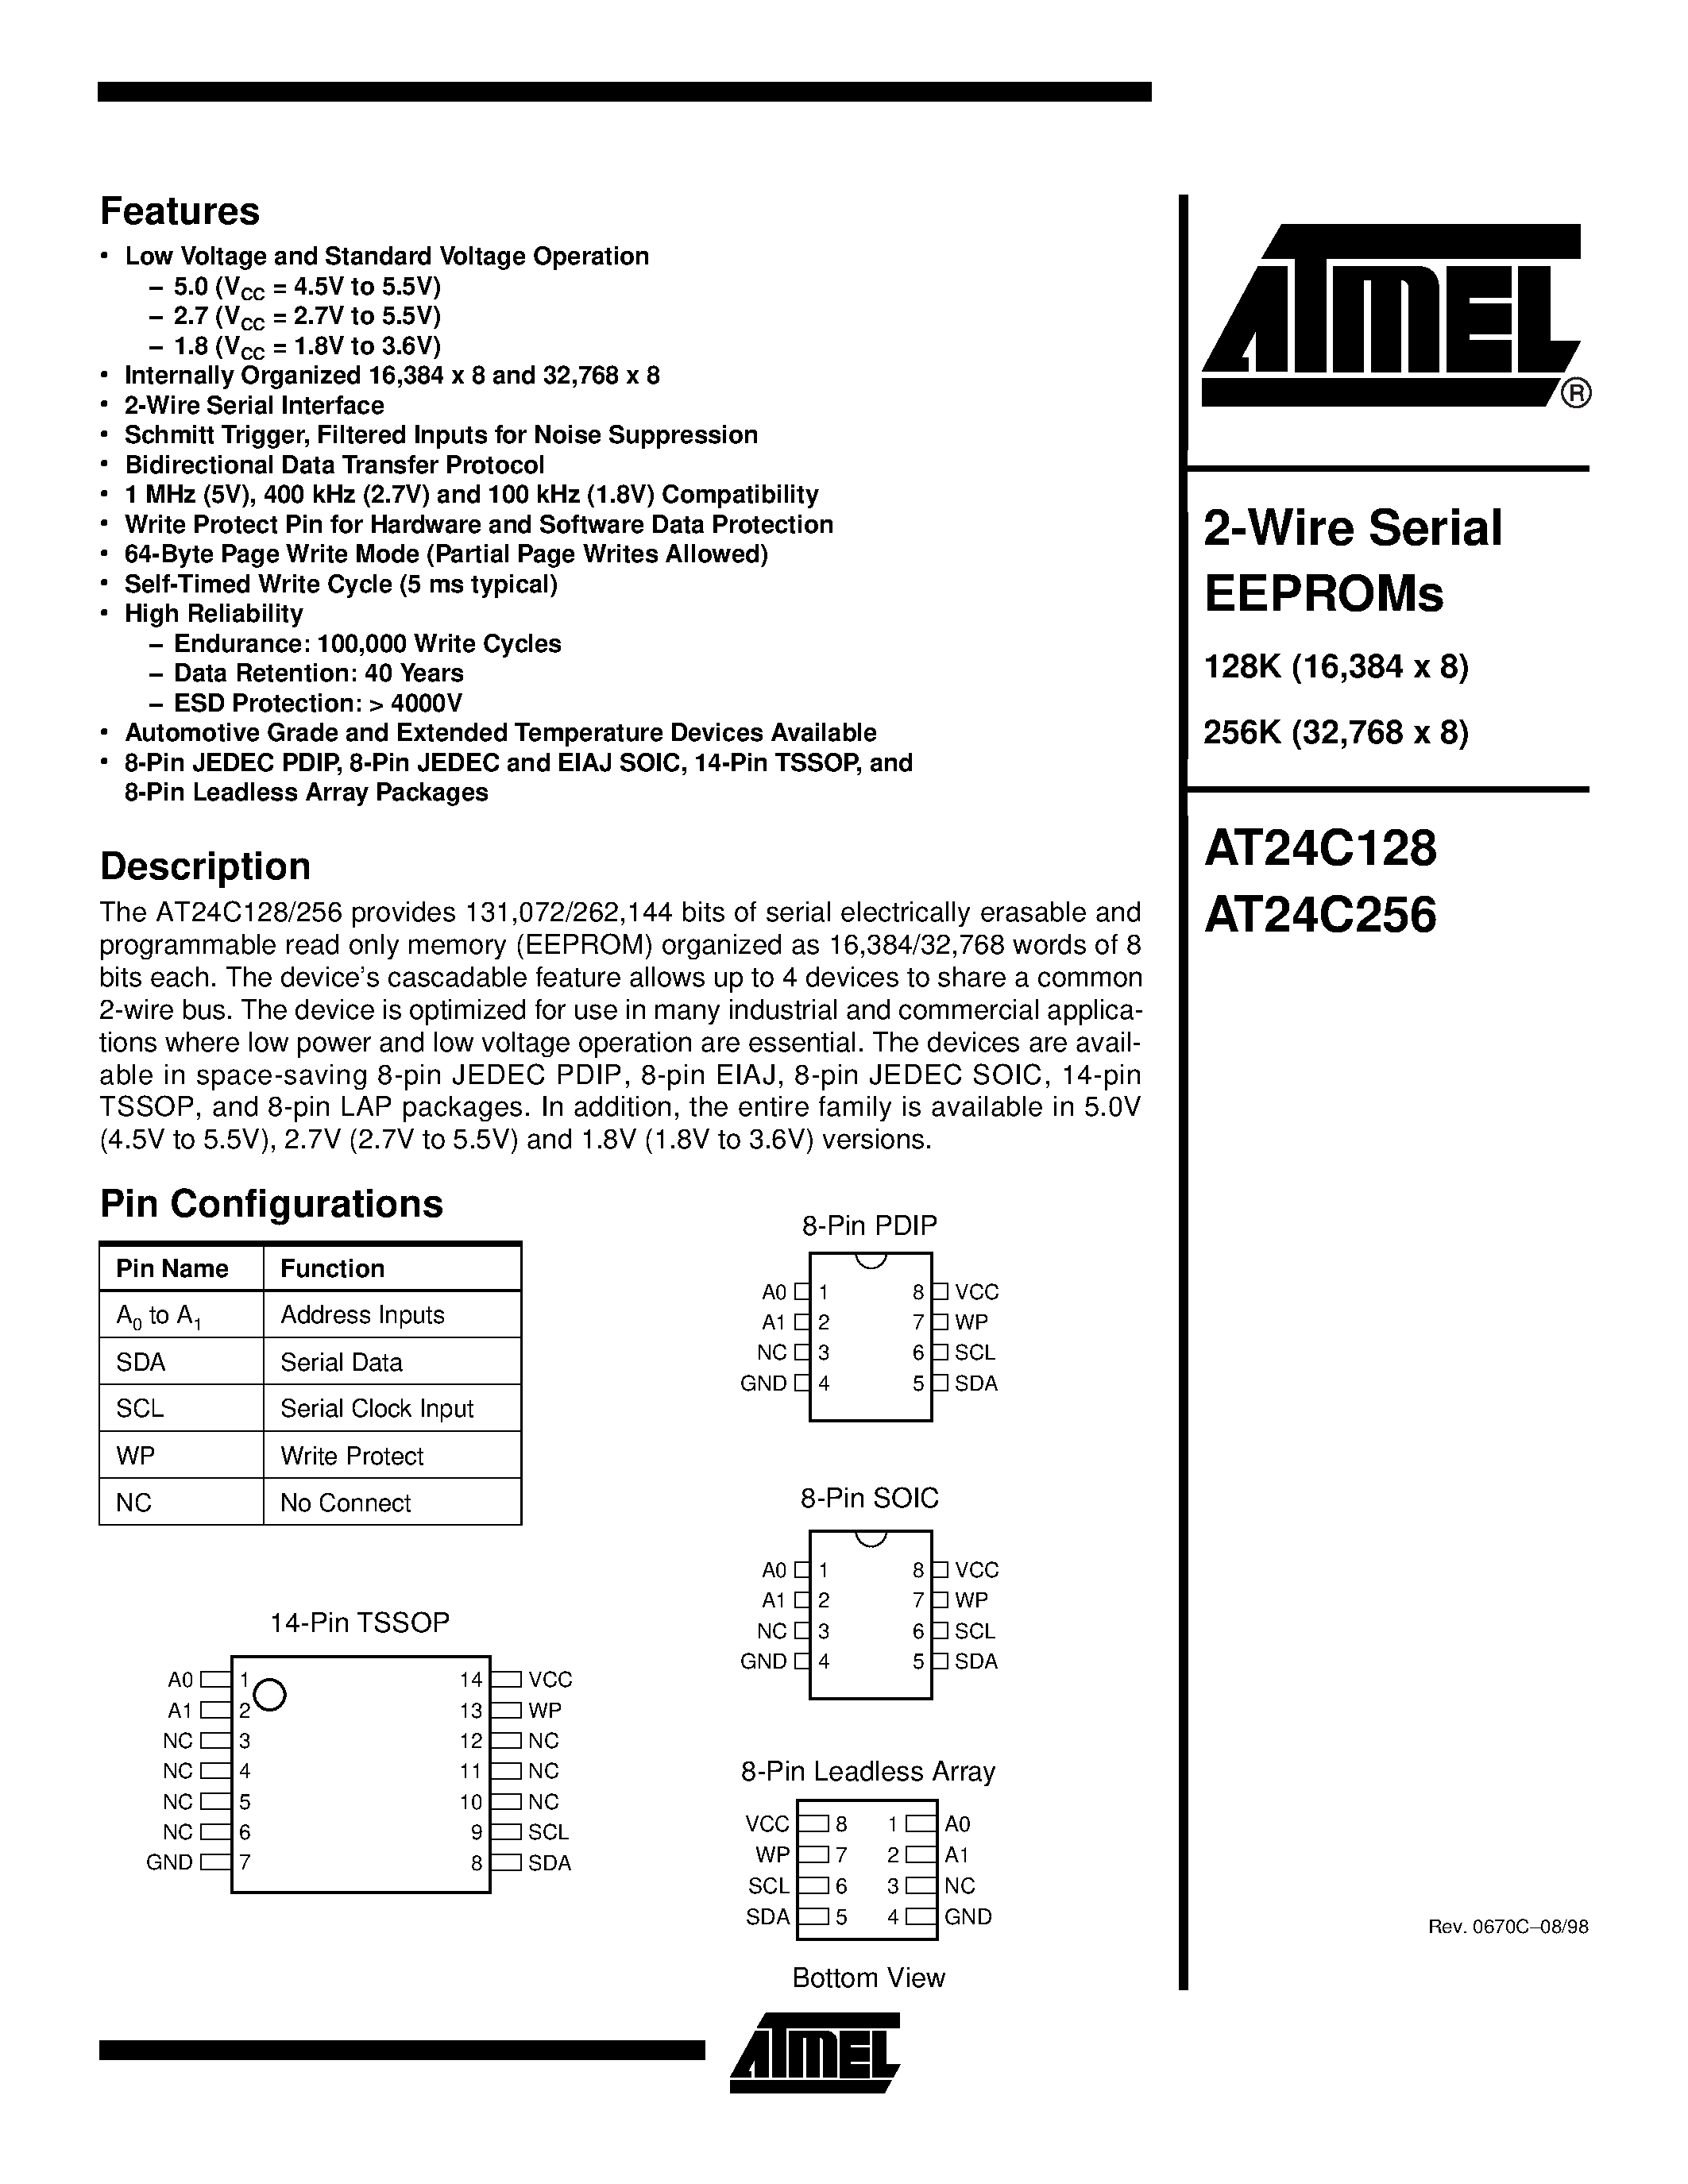 Datasheet AT24C256-10PC-2.7 - 2-Wire Serial EEPROMs page 1